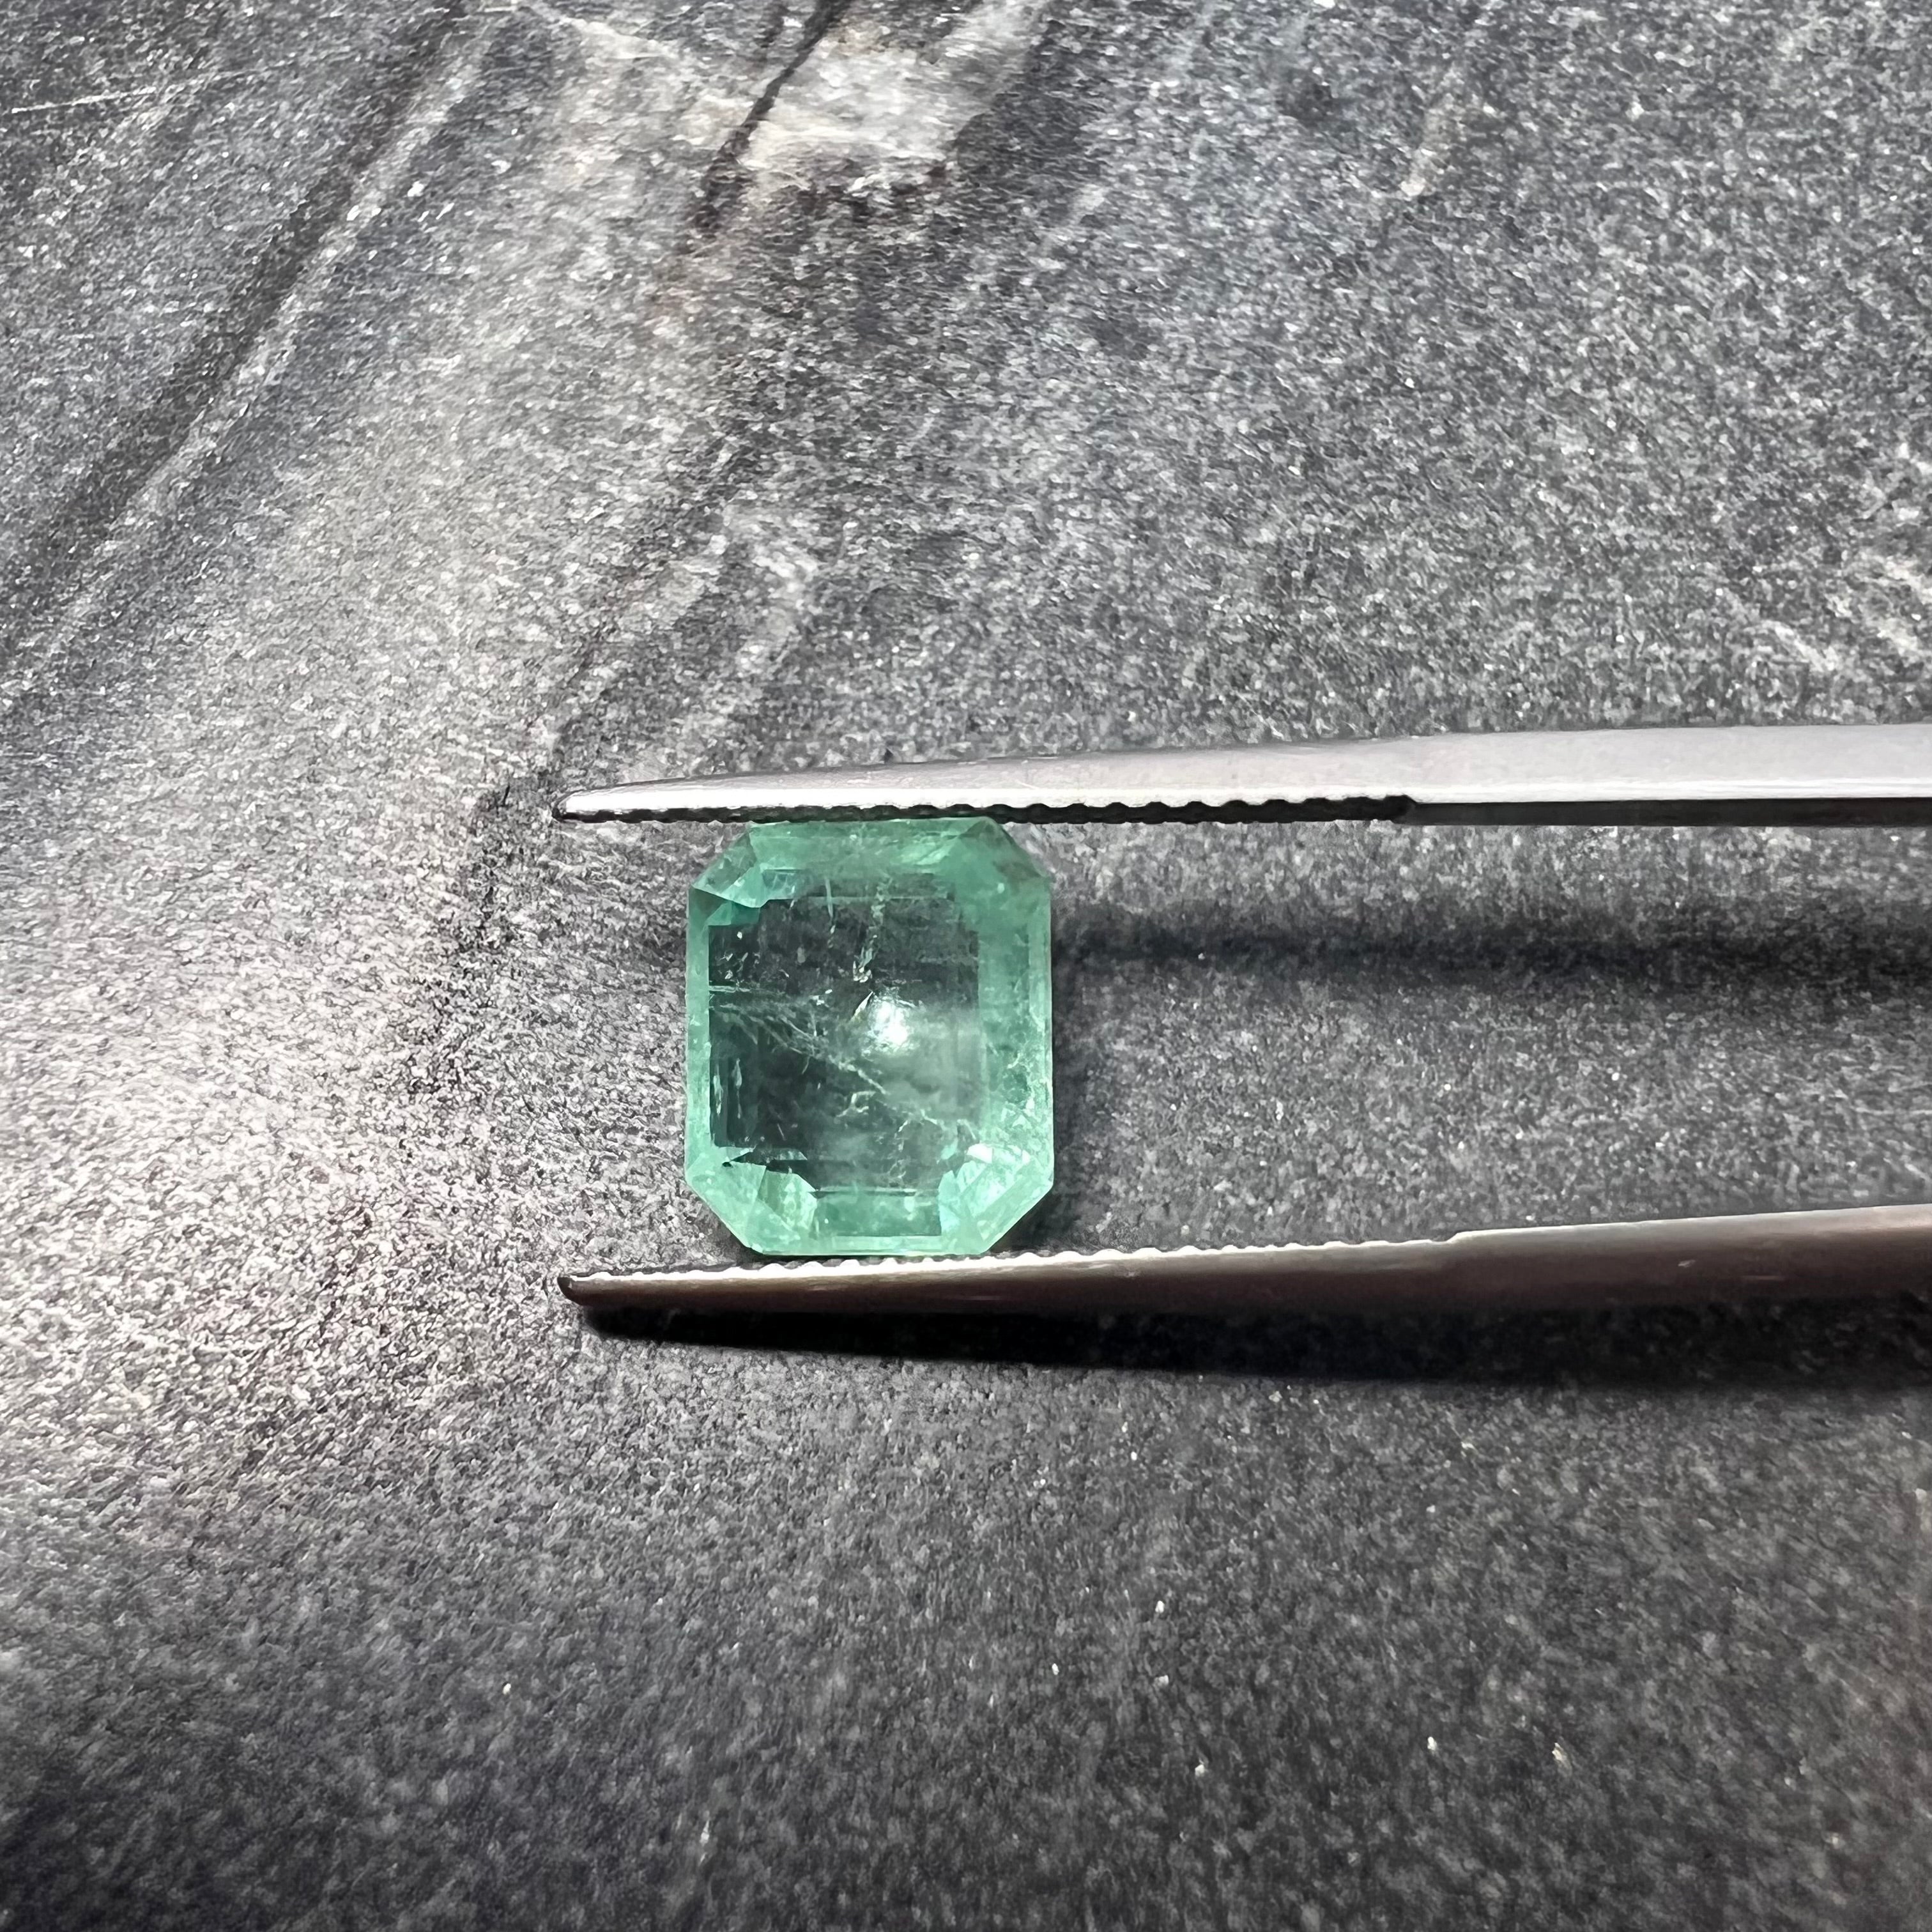 2.94CT Natural Colombian Emerald Rectangle Cut 9.86x8.21x4.69mm